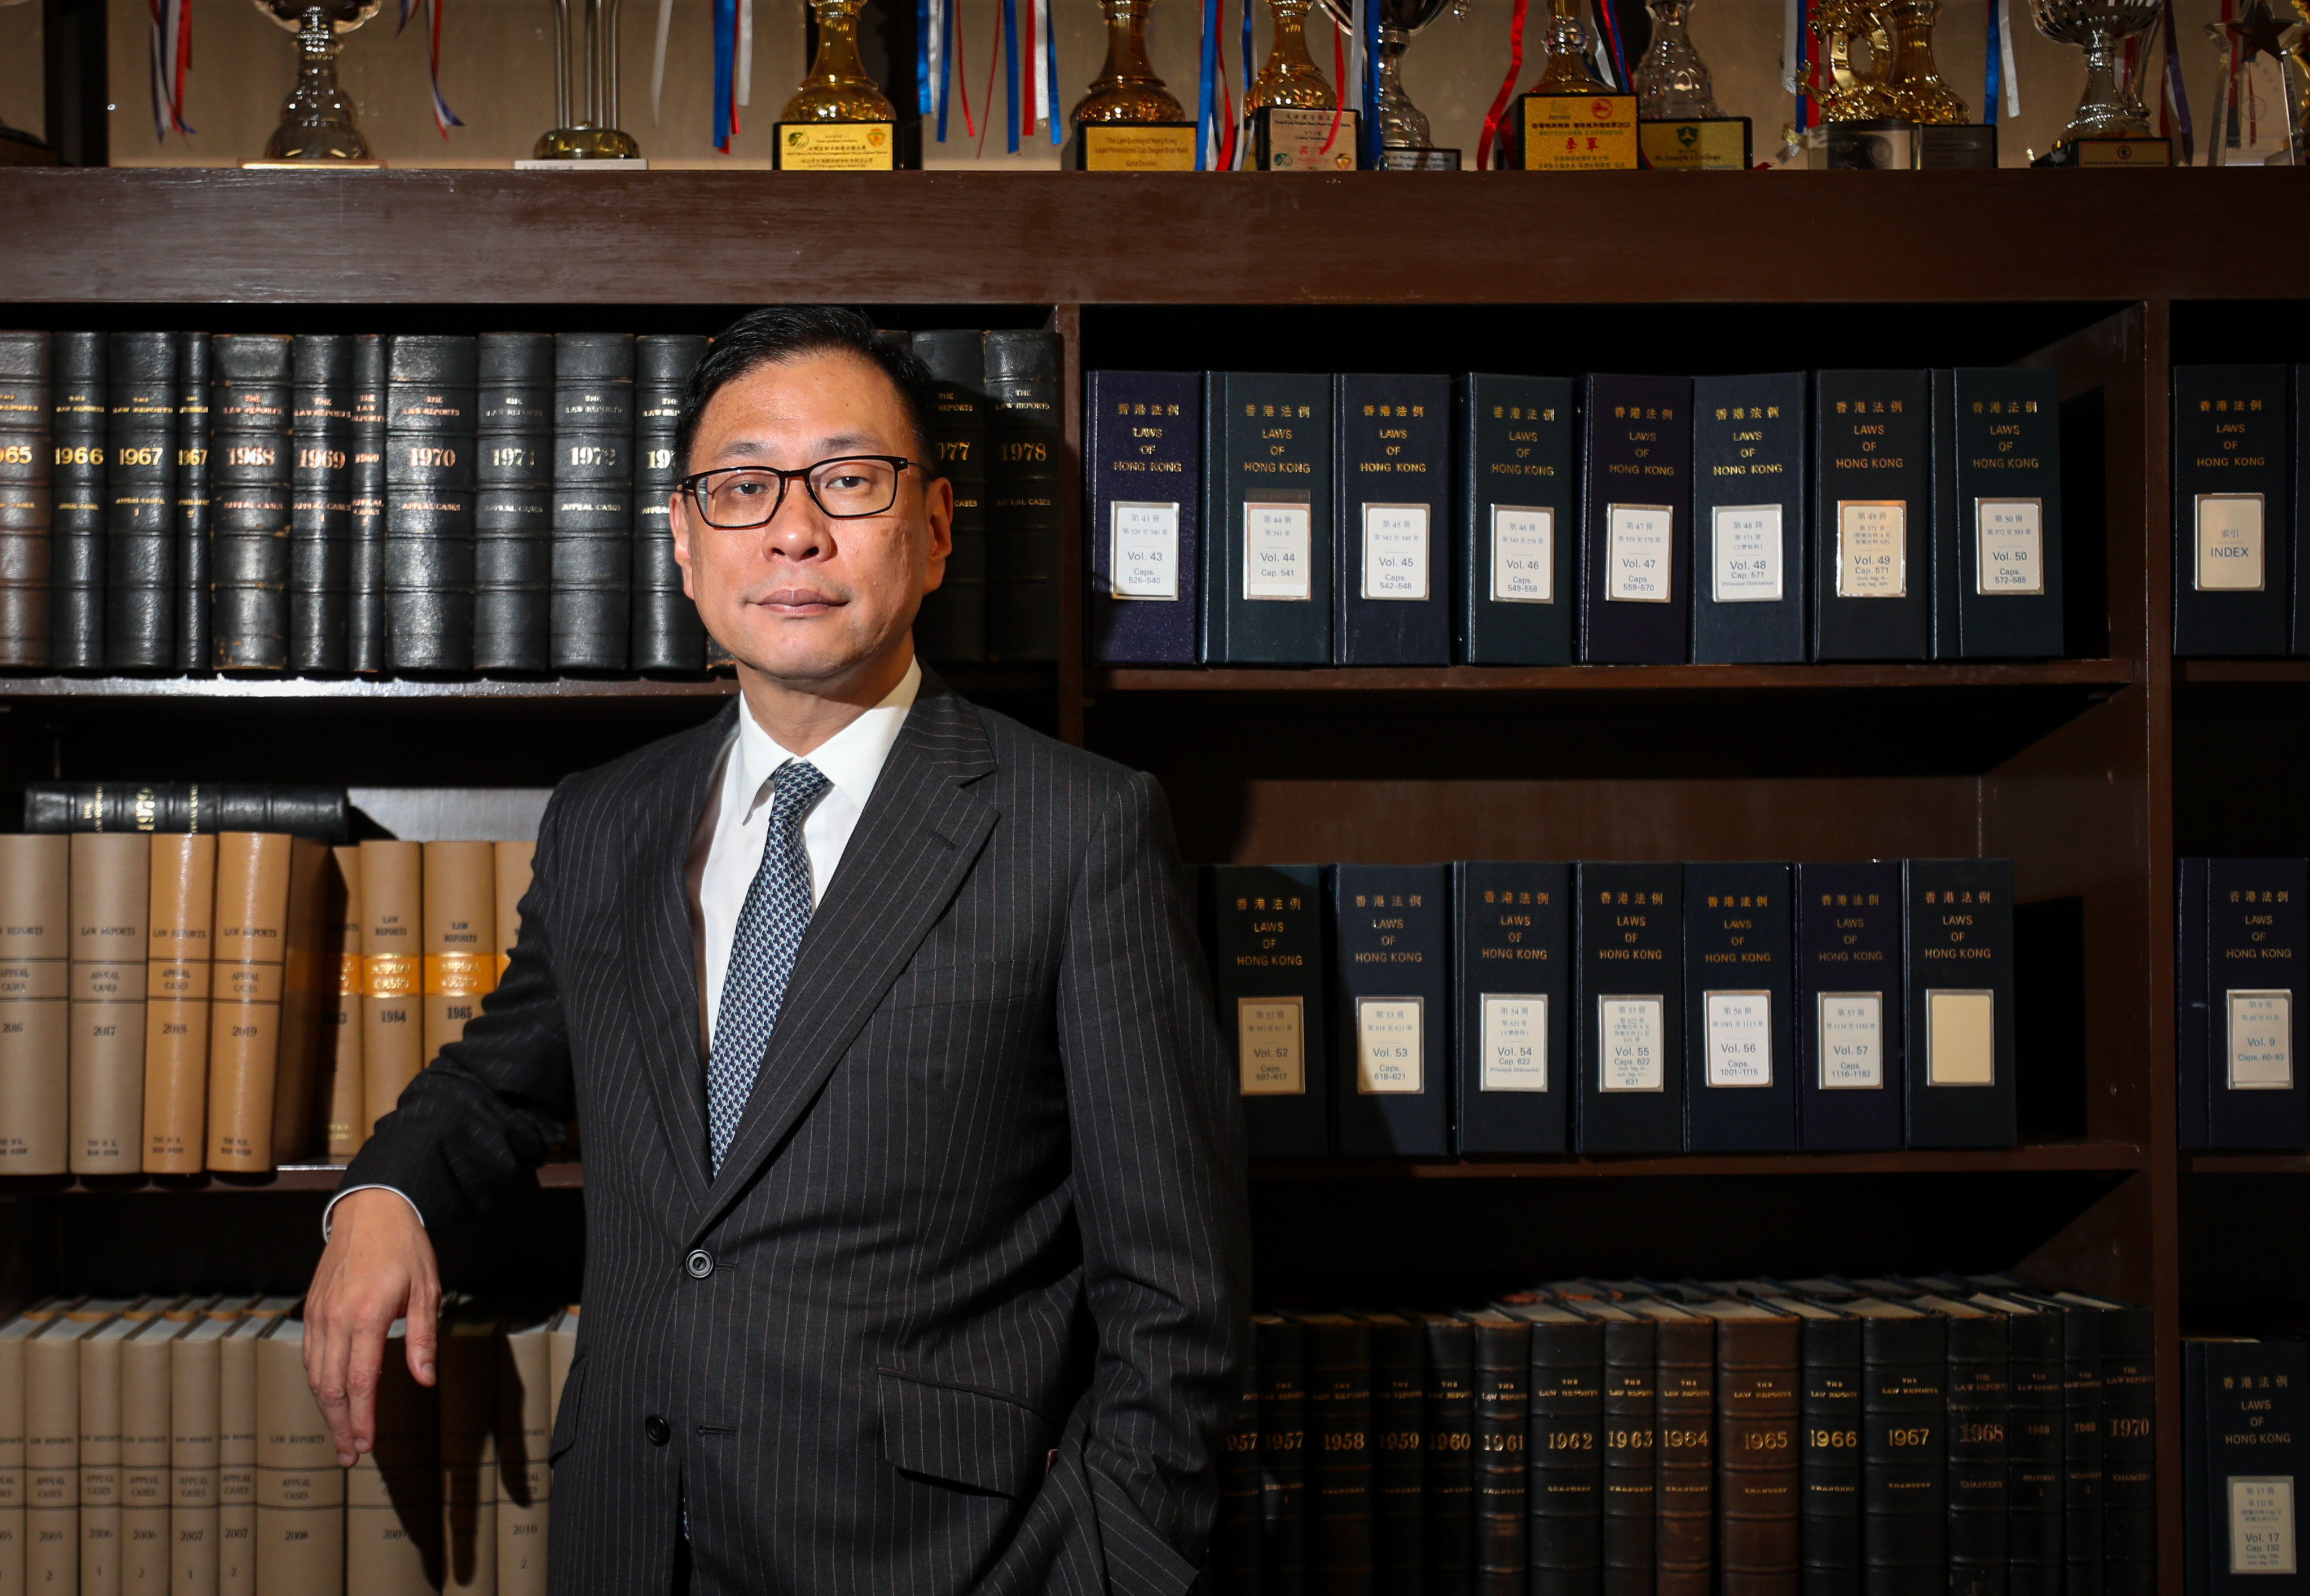 Victor Dawes, the chairman of the Bar Association, says Beijing takes its views seriously. Photo: Xiaomei Chen